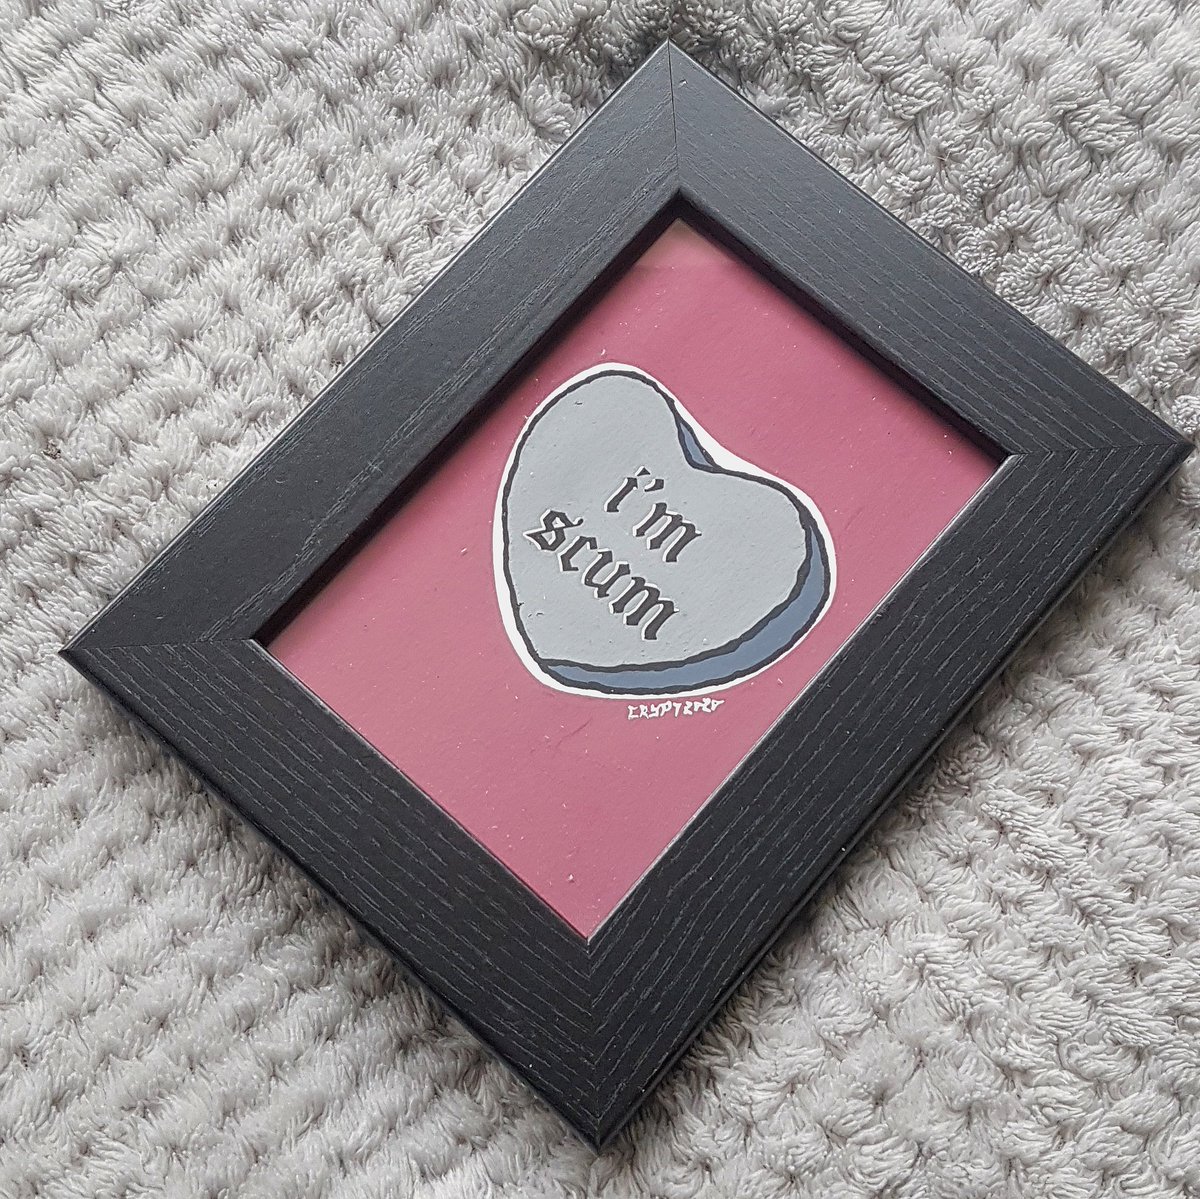 love hearts (a6)only "piss" is still available but i can recreate them or make a custom phrase of colour scheme for £20 each